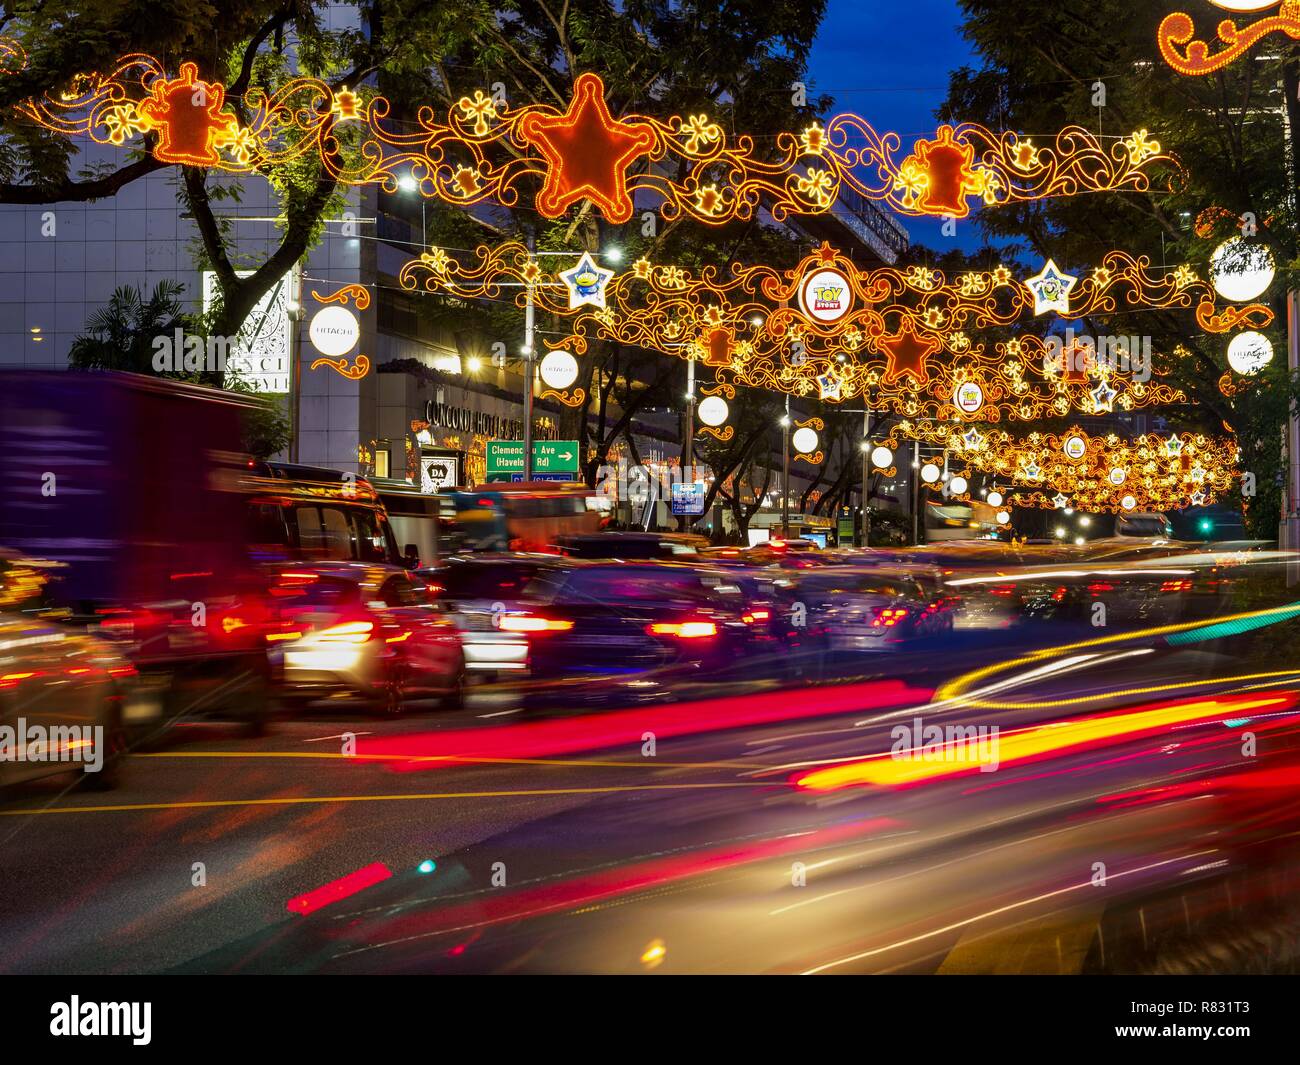 Took some pictures of the Christmas lights at Orchard road this year. : r/ singapore